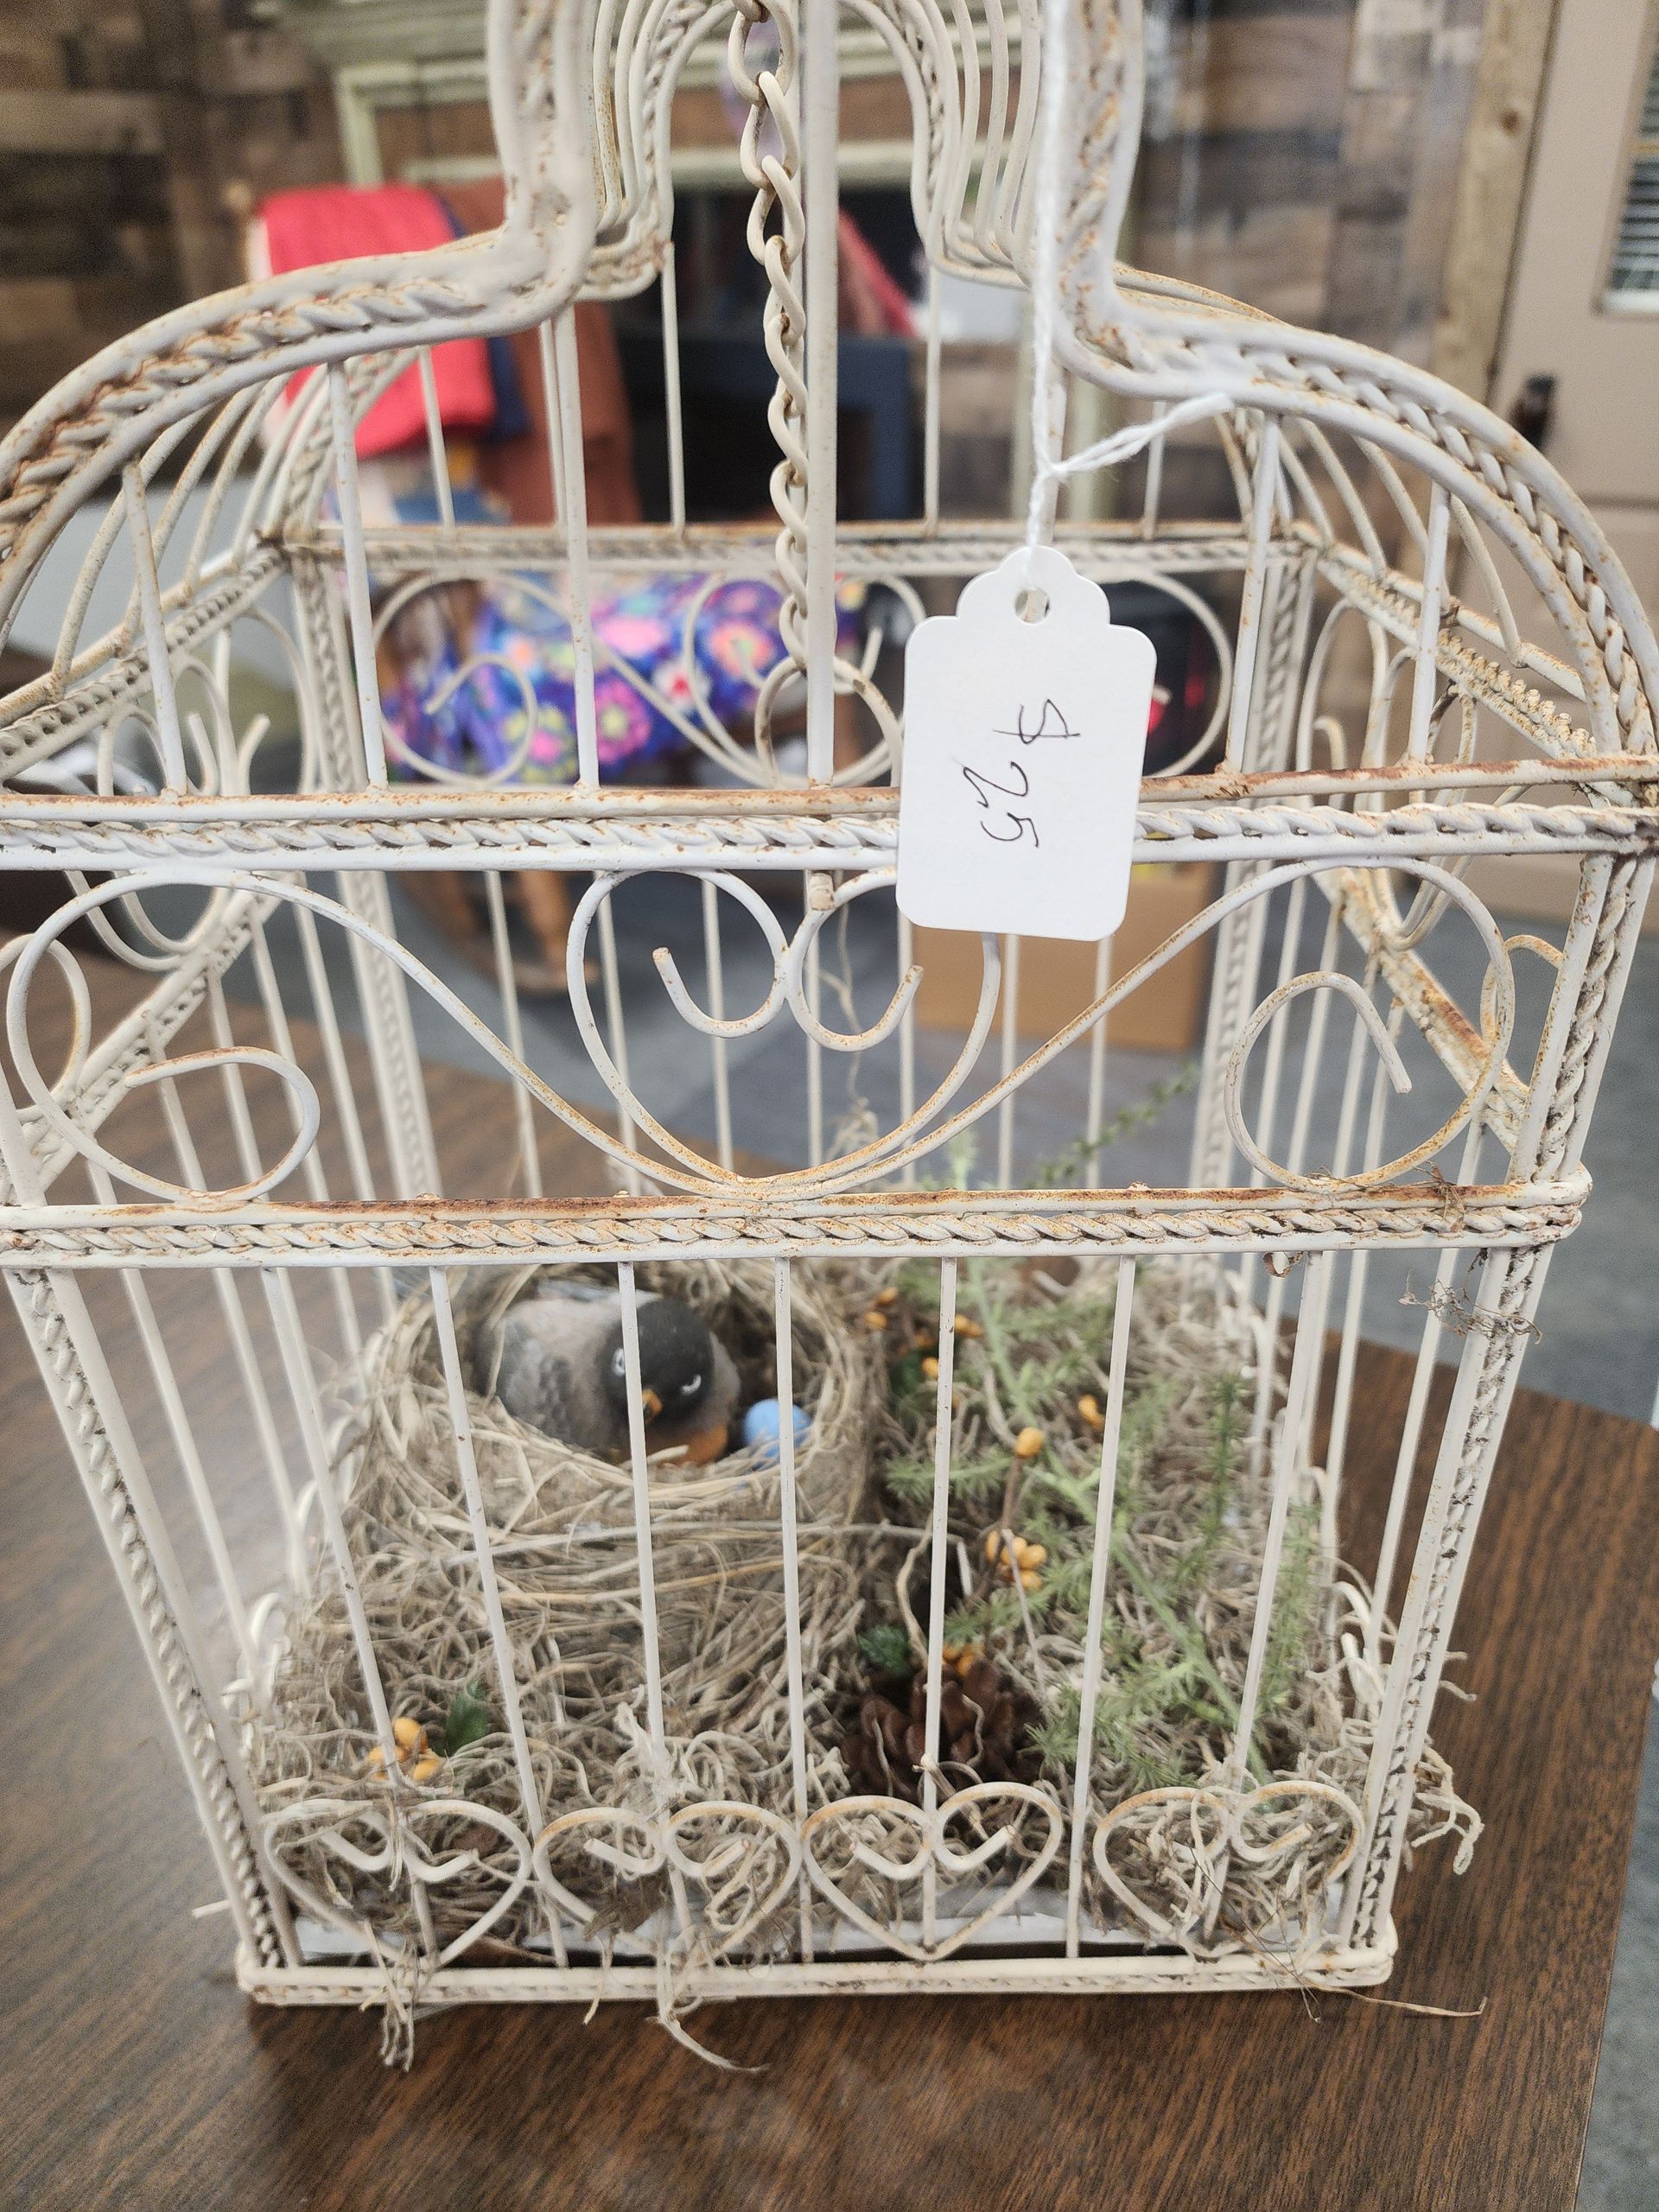 A bird cage with a tag attached to it